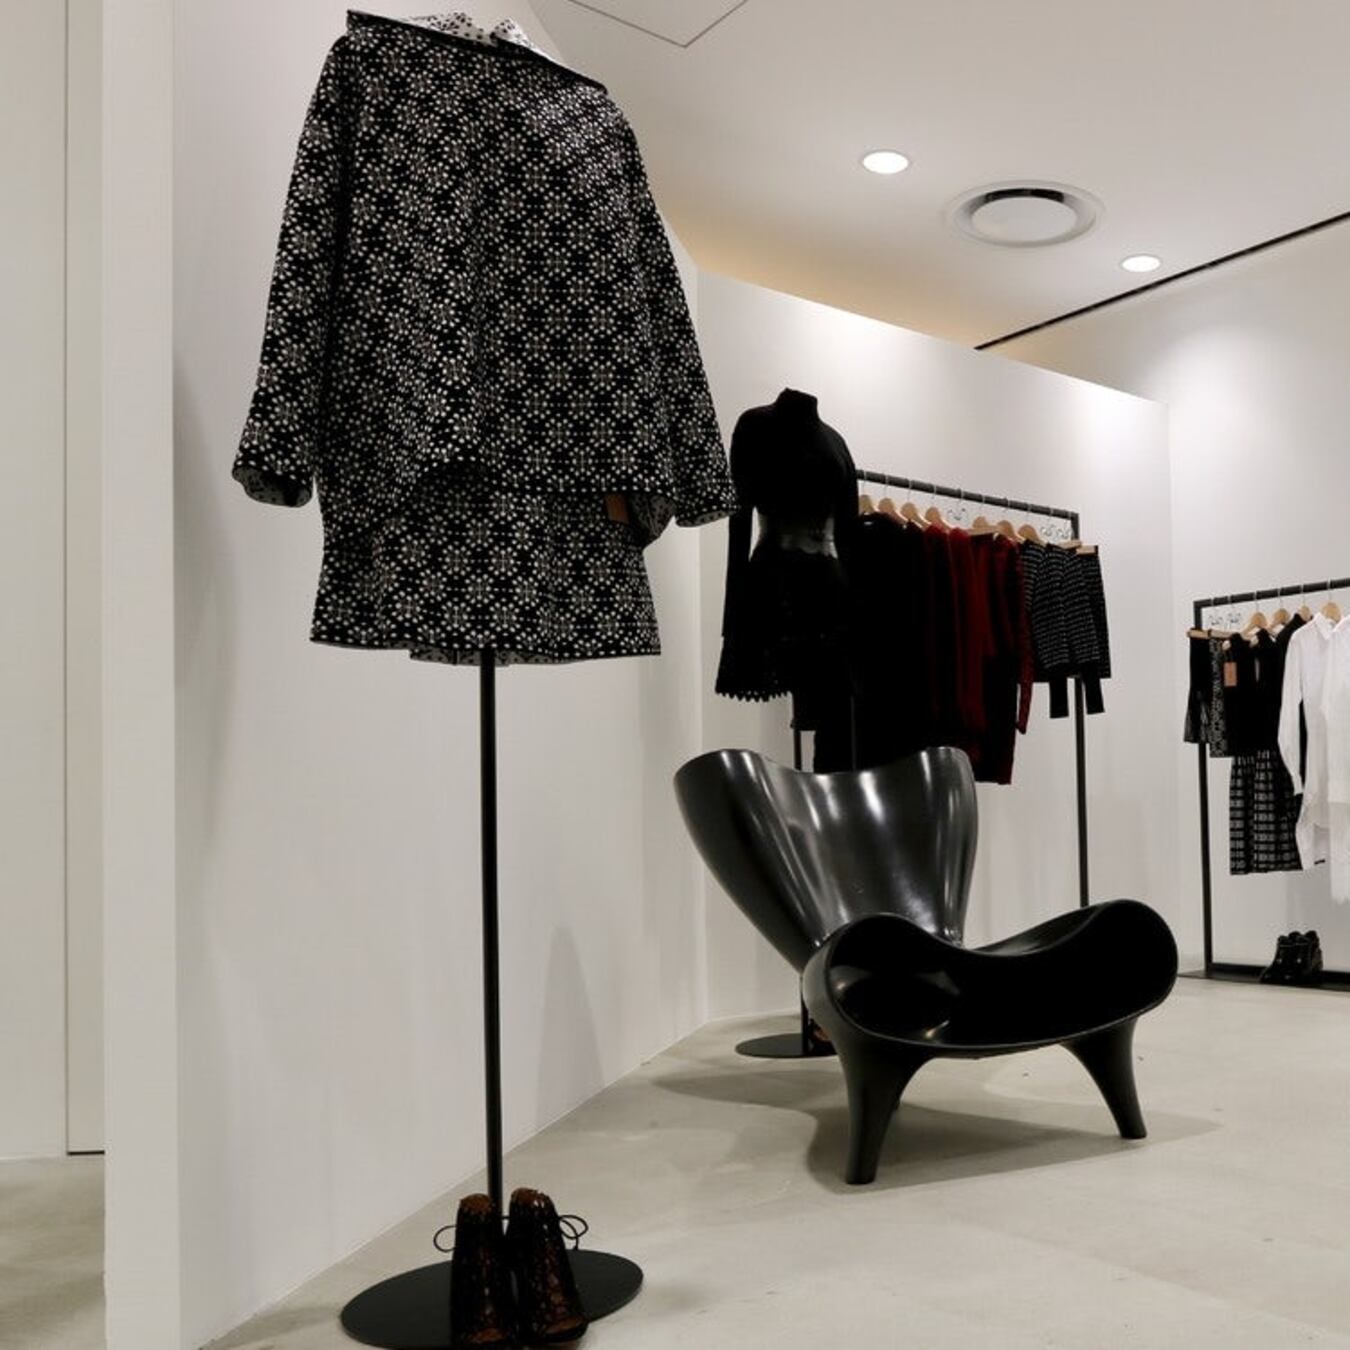 Project-DOVER STREET MARKET GINZA